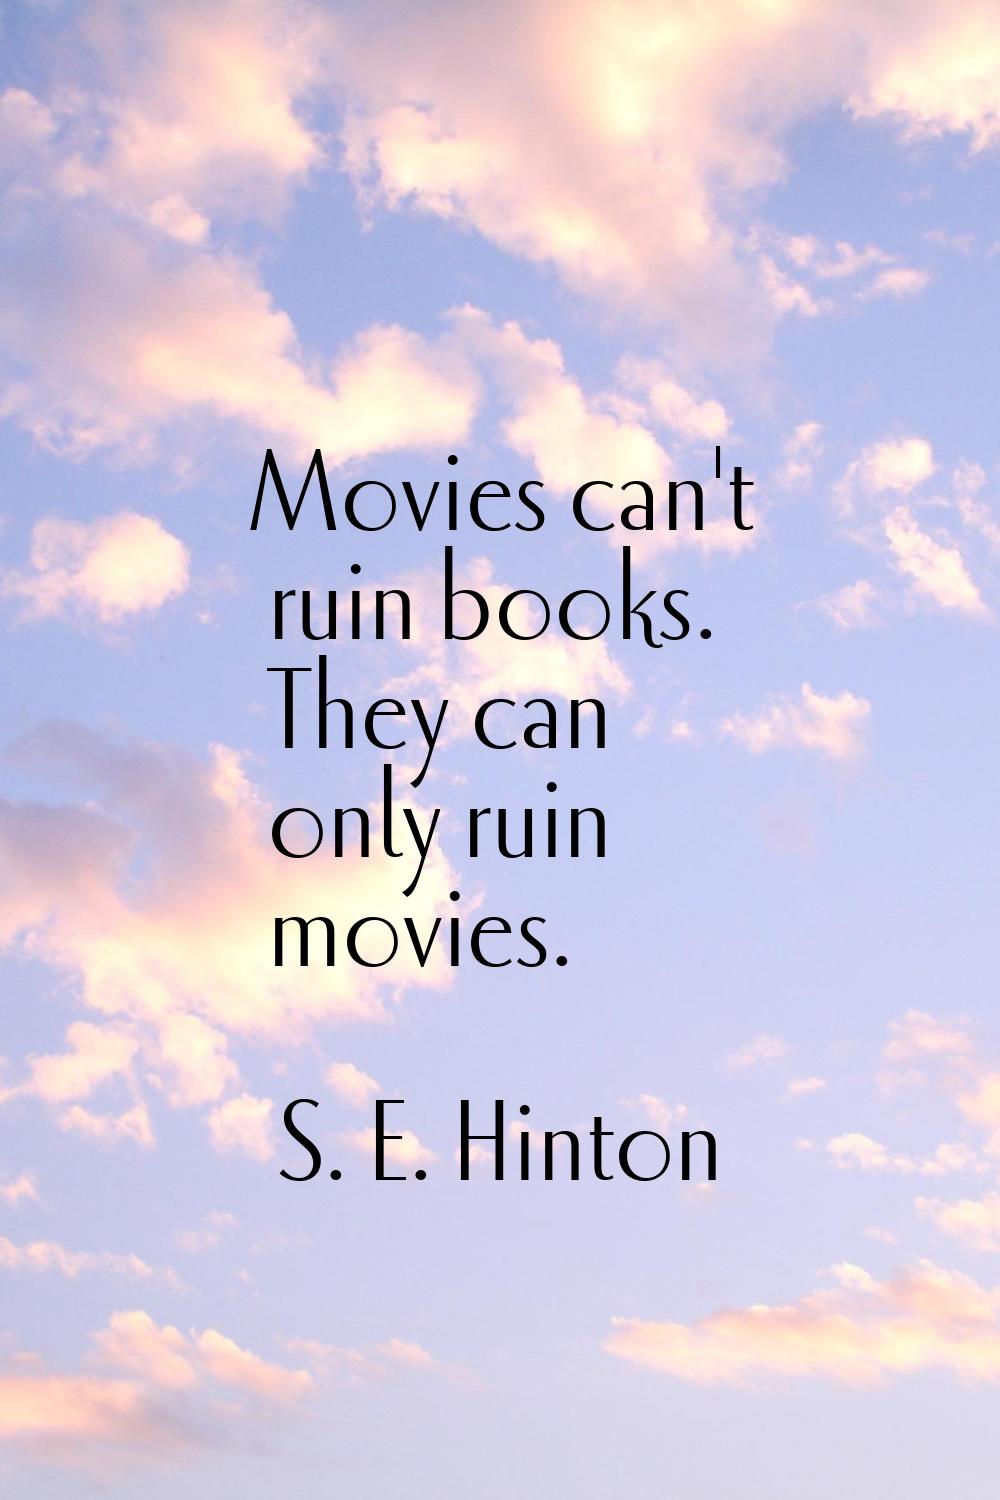 Movies can't ruin books. They can only ruin movies.